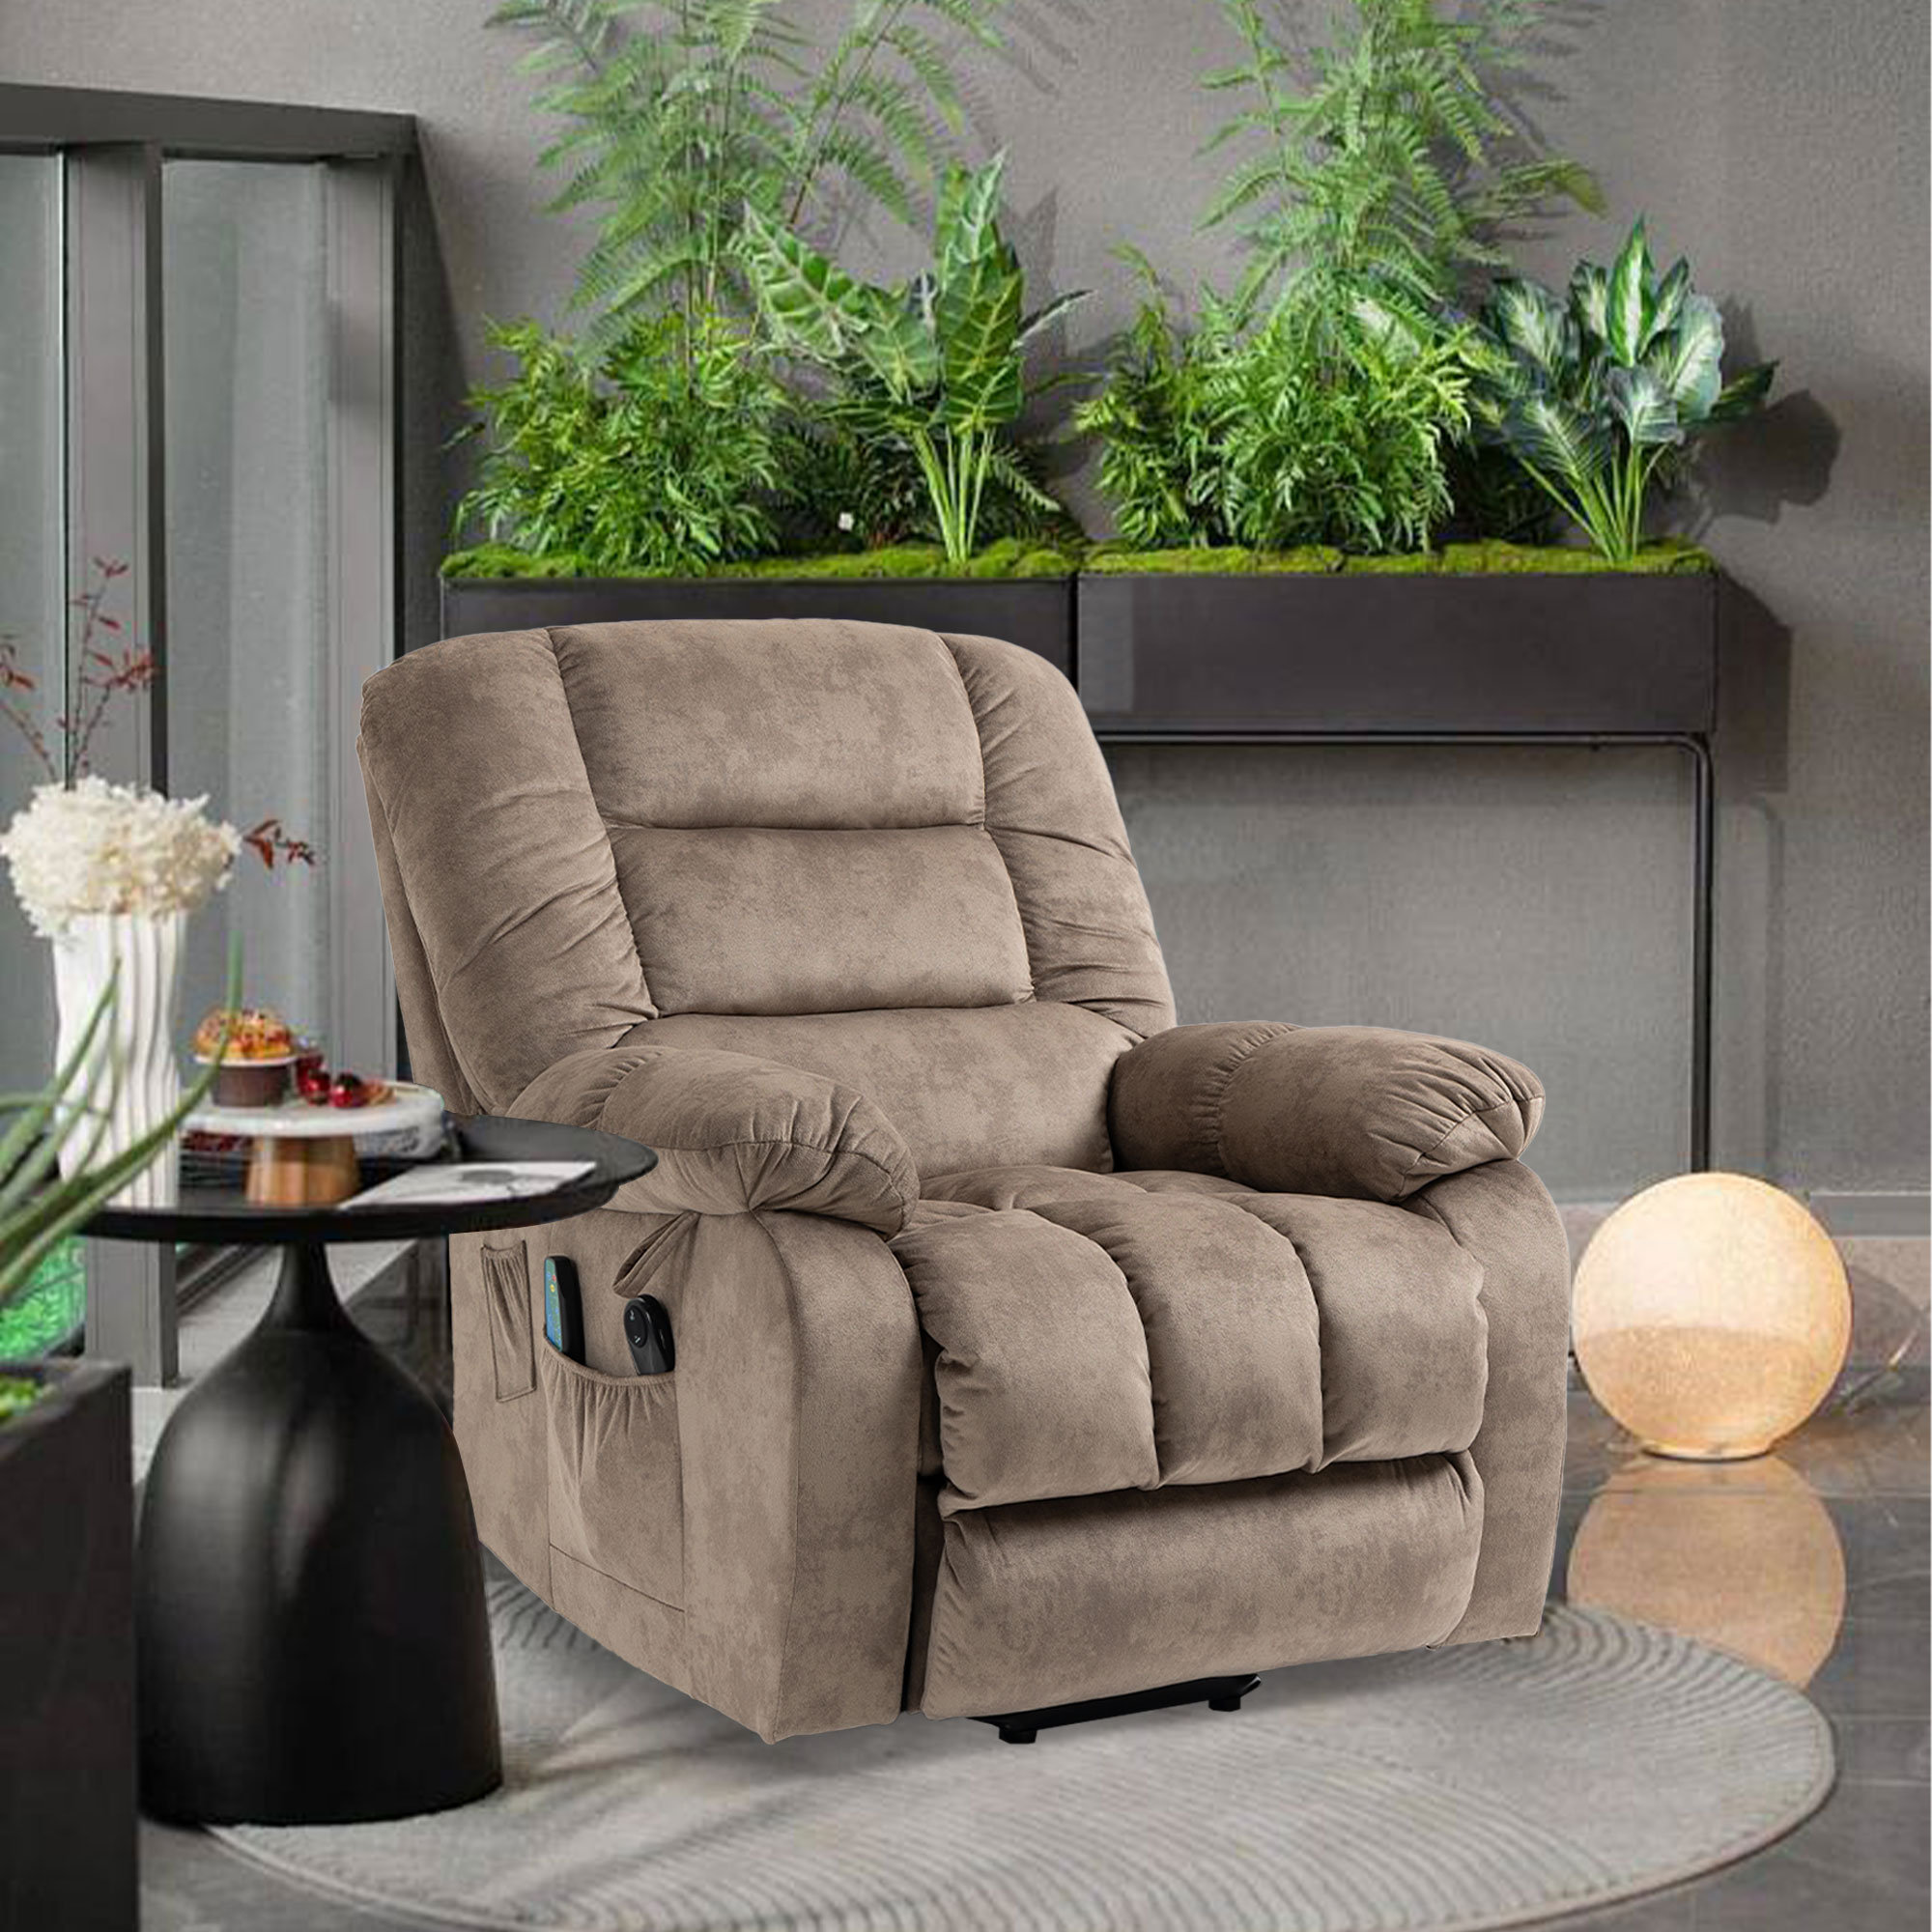 Modern Living Room Recliner Made of Thick Cushion Fabric with Massage Function Latitude Run Fabric: Gray Linen Blend